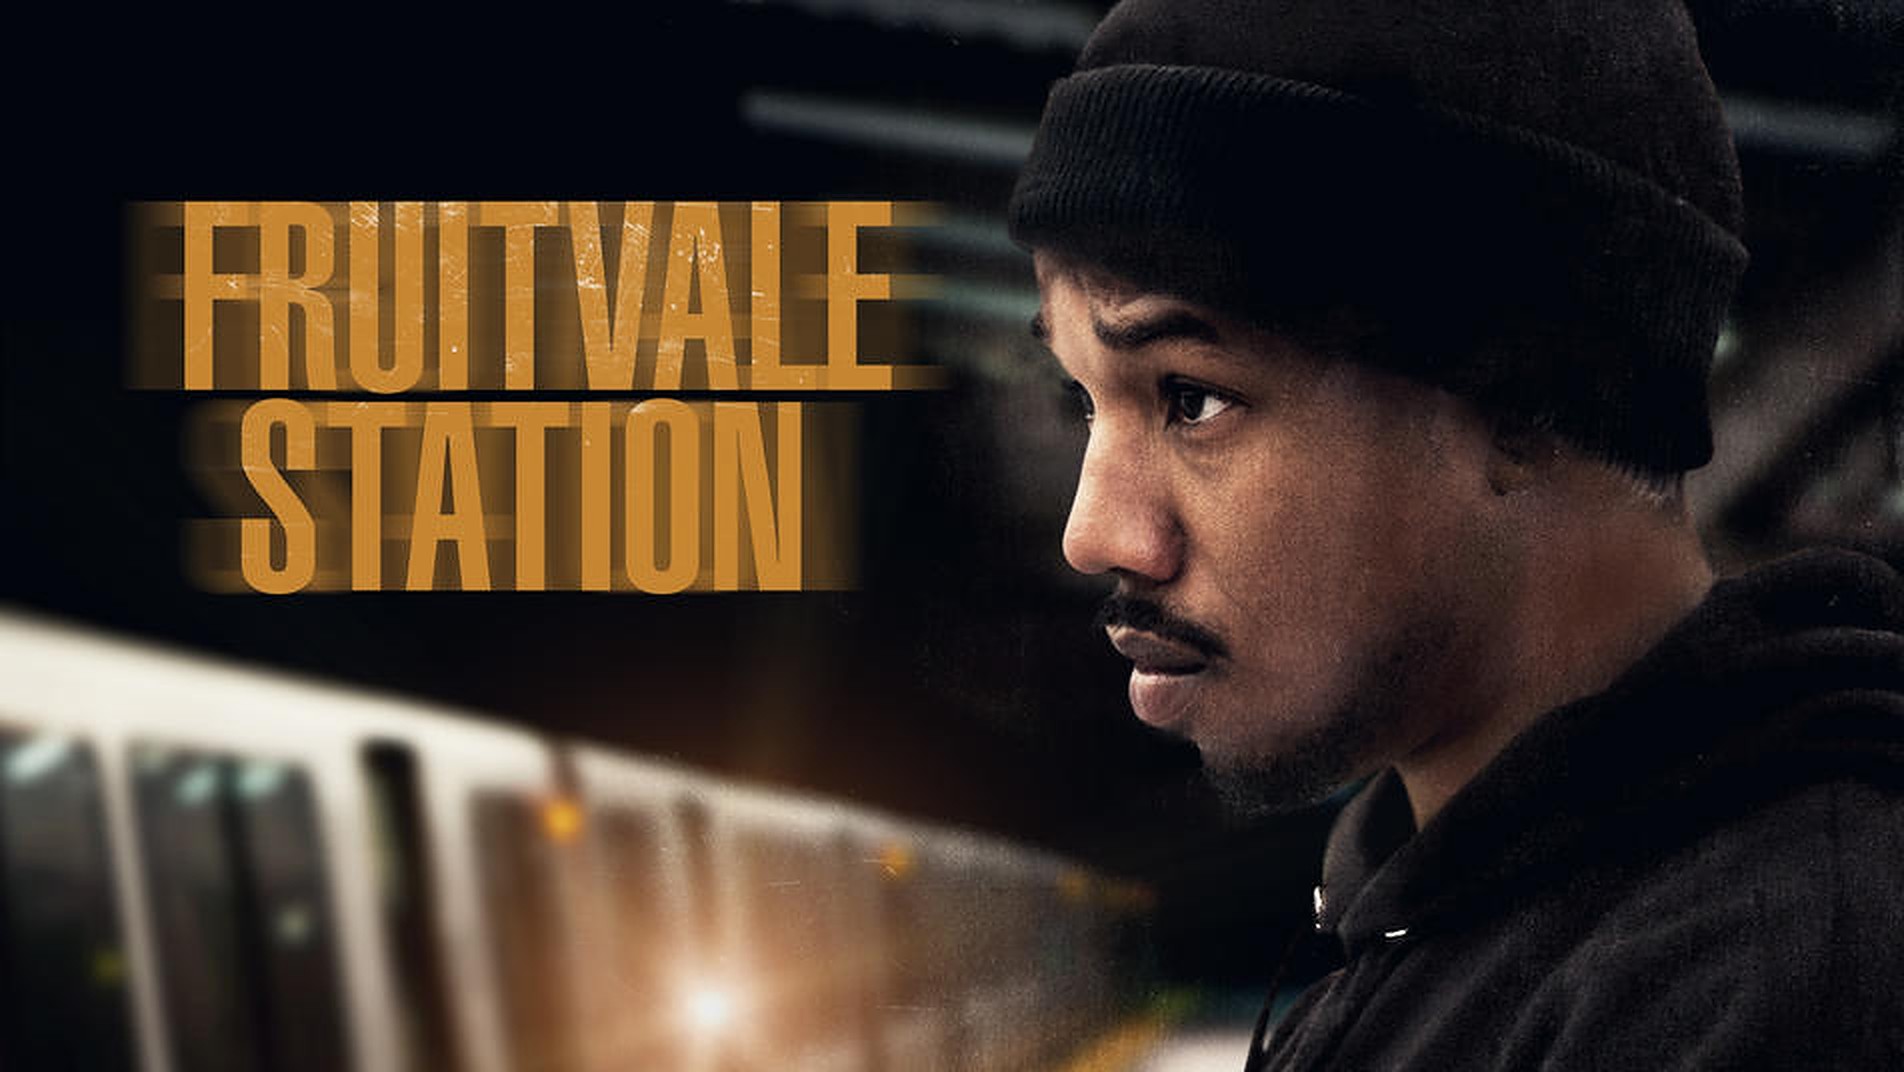 45-facts-about-the-movie-fruitvale-station